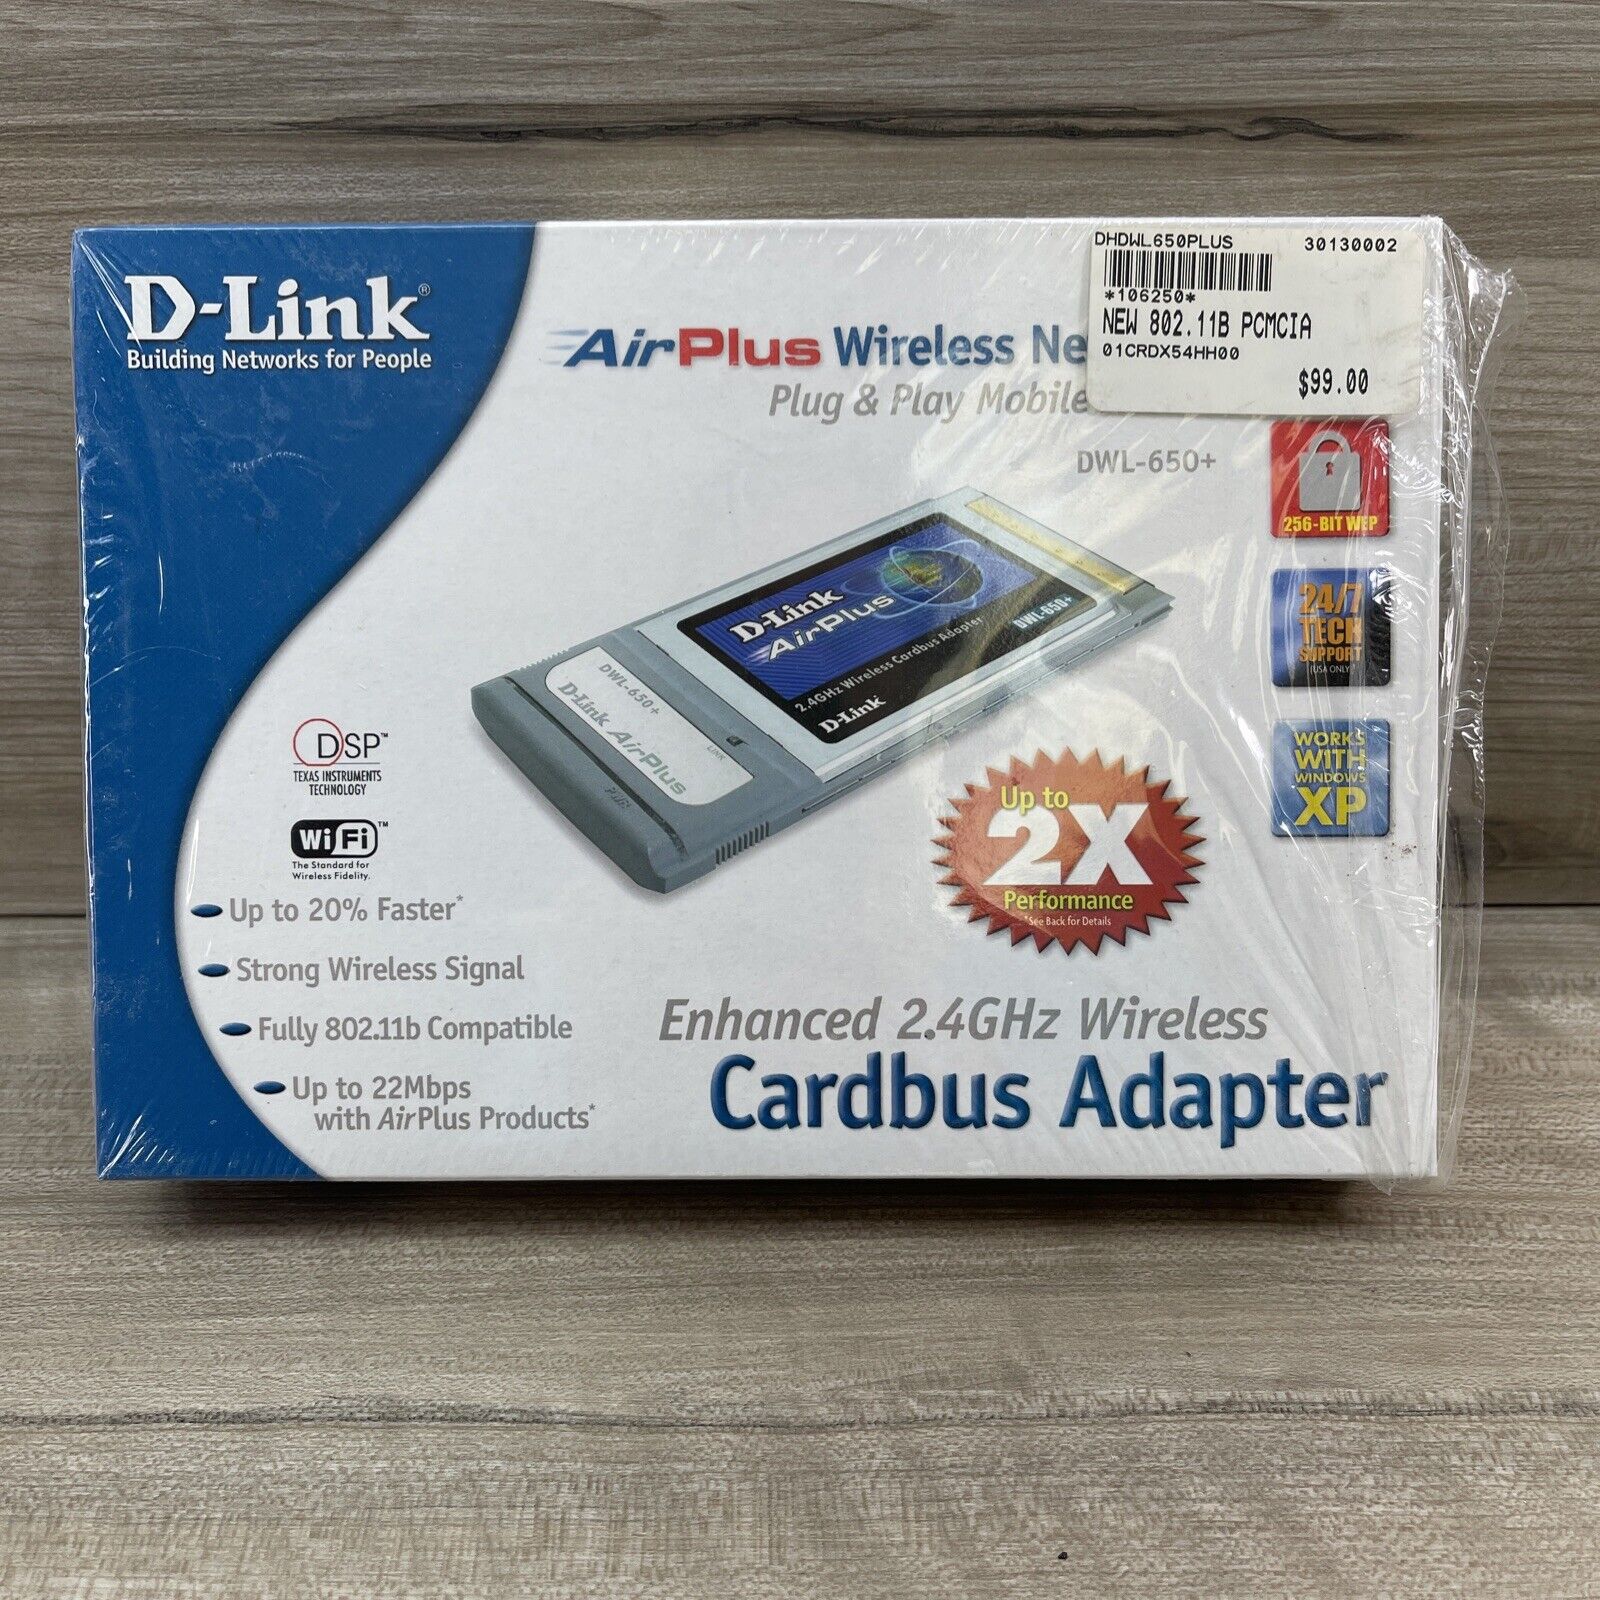 BRAND NEW D-link AirPro 2.4GHz Wireless Adapter Cardbus DWL-650